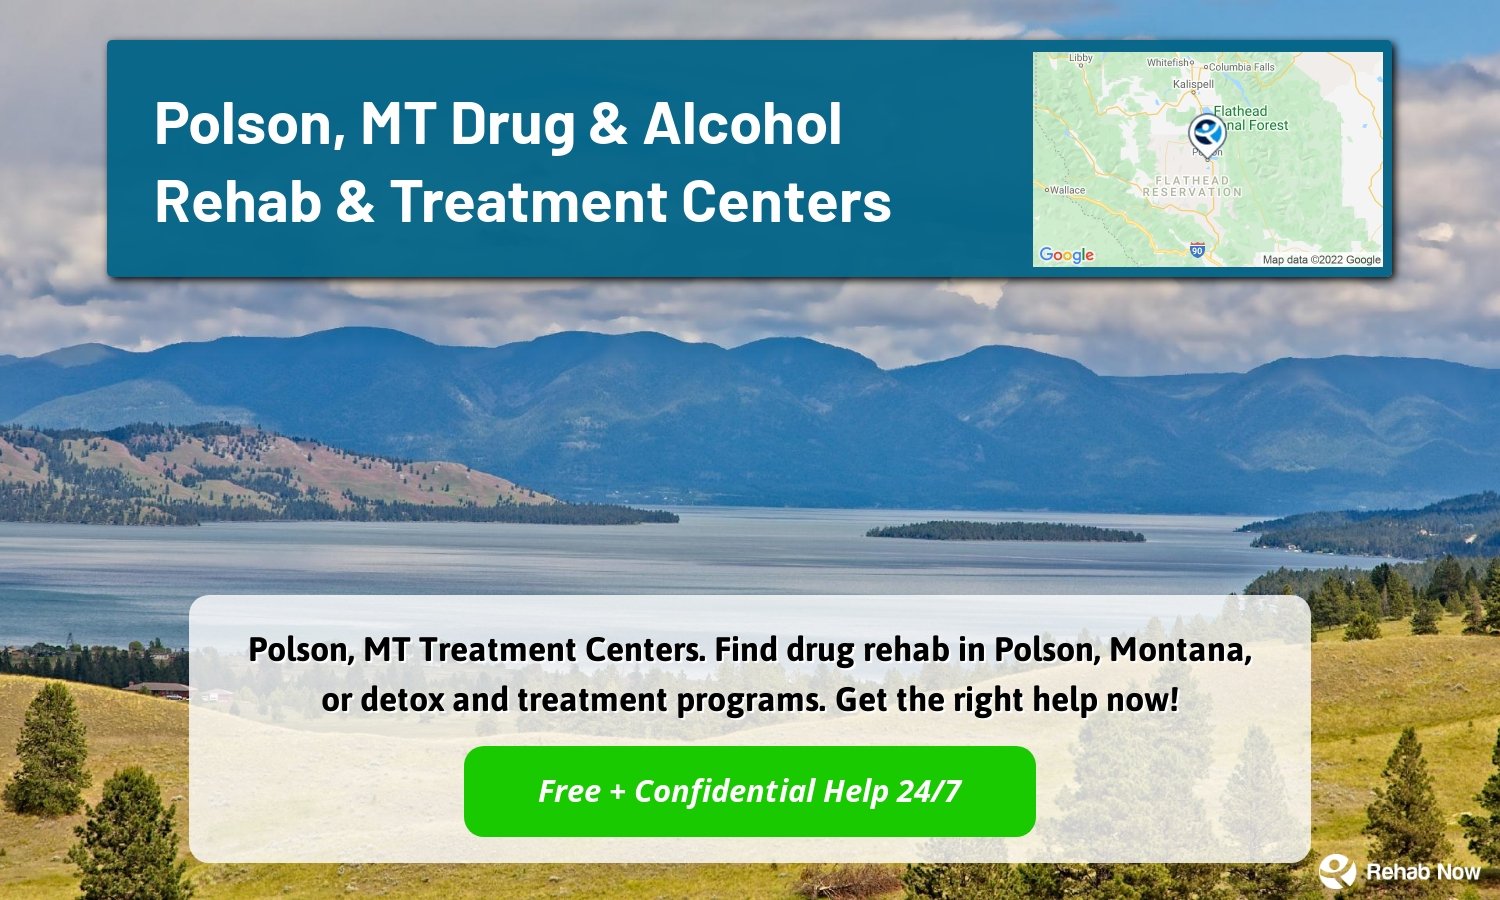 Polson, MT Treatment Centers. Find drug rehab in Polson, Montana, or detox and treatment programs. Get the right help now!